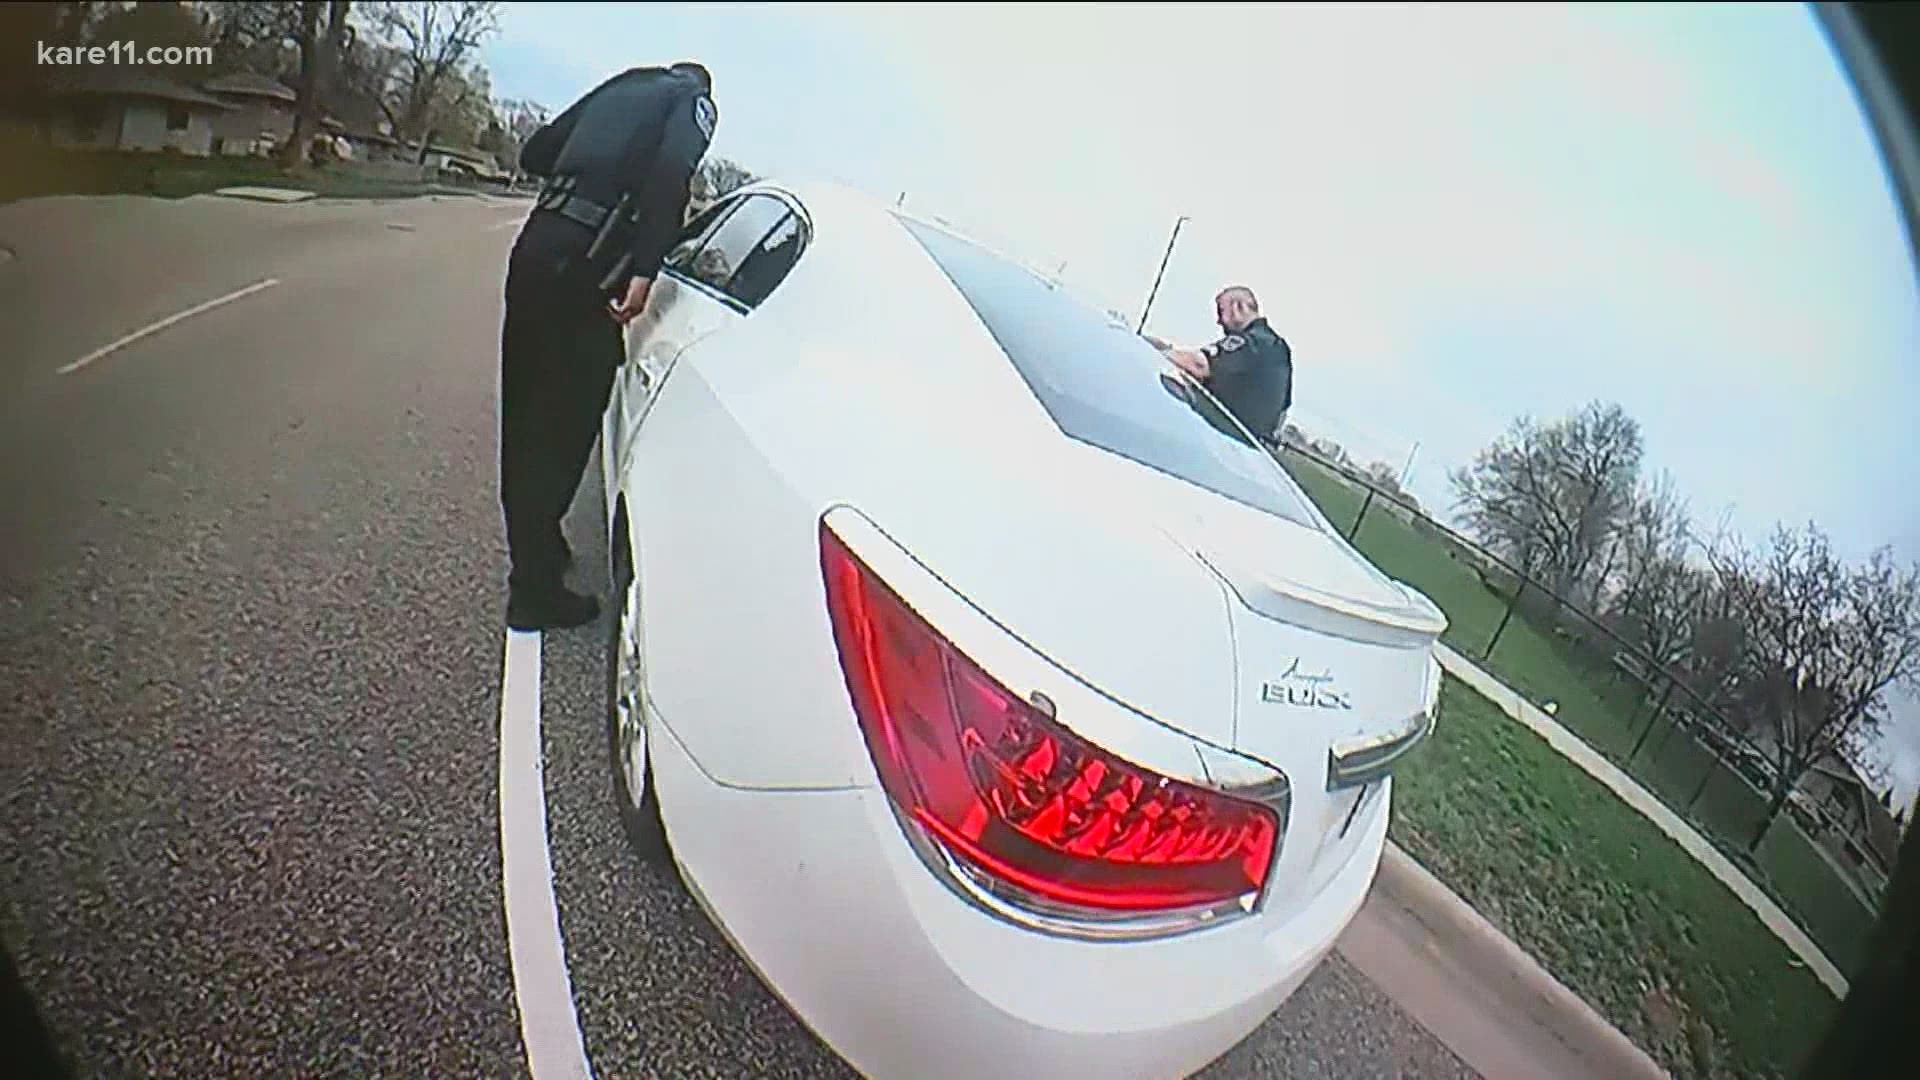 Warning: Elements of the video are graphic. Police released body camera footage of the fatal shooting of 20-year-old Daunte Wright during a traffic stop Sunday.